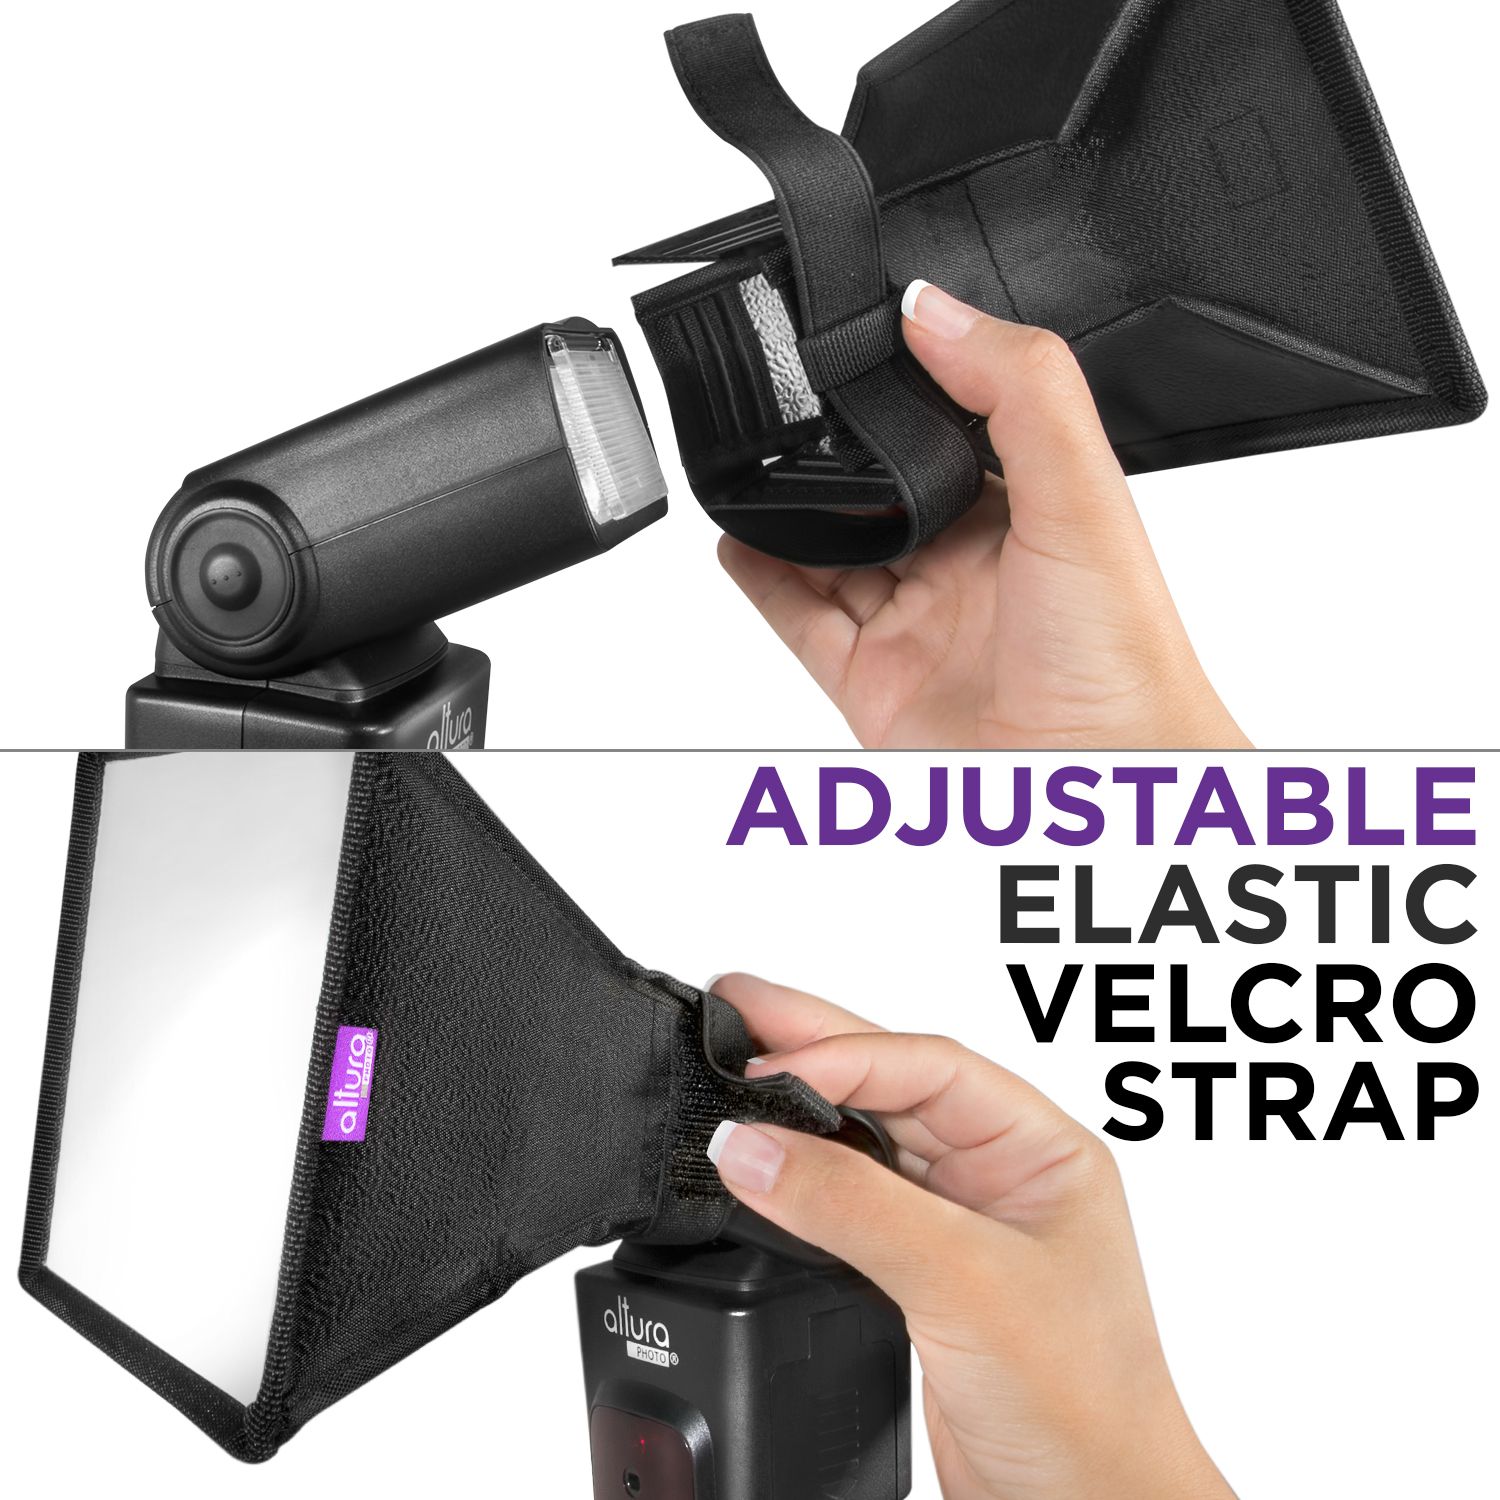 for Canon Yongnuo and Nikon Speedlight Flash Diffuser Light Softbox 9x7” by Altura Photo Universal, Collapsible with Storage Pouch 